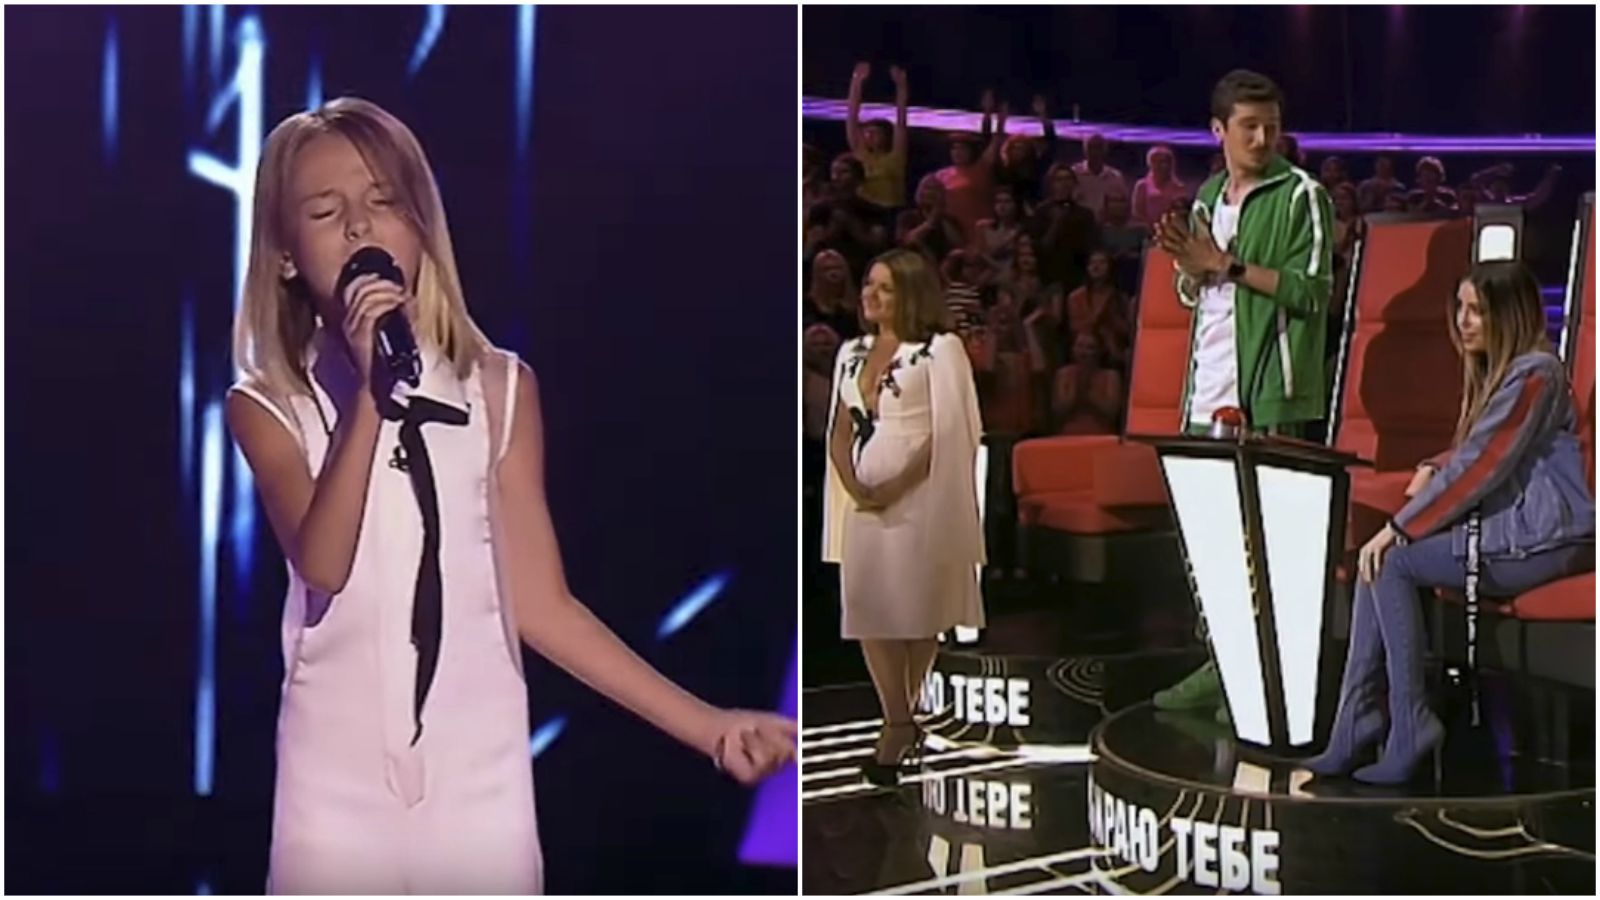 10-Year-Old Performs One of Demi Lovato’s Most Difficult Songs. She Leaves All 4 Judges Speechless!